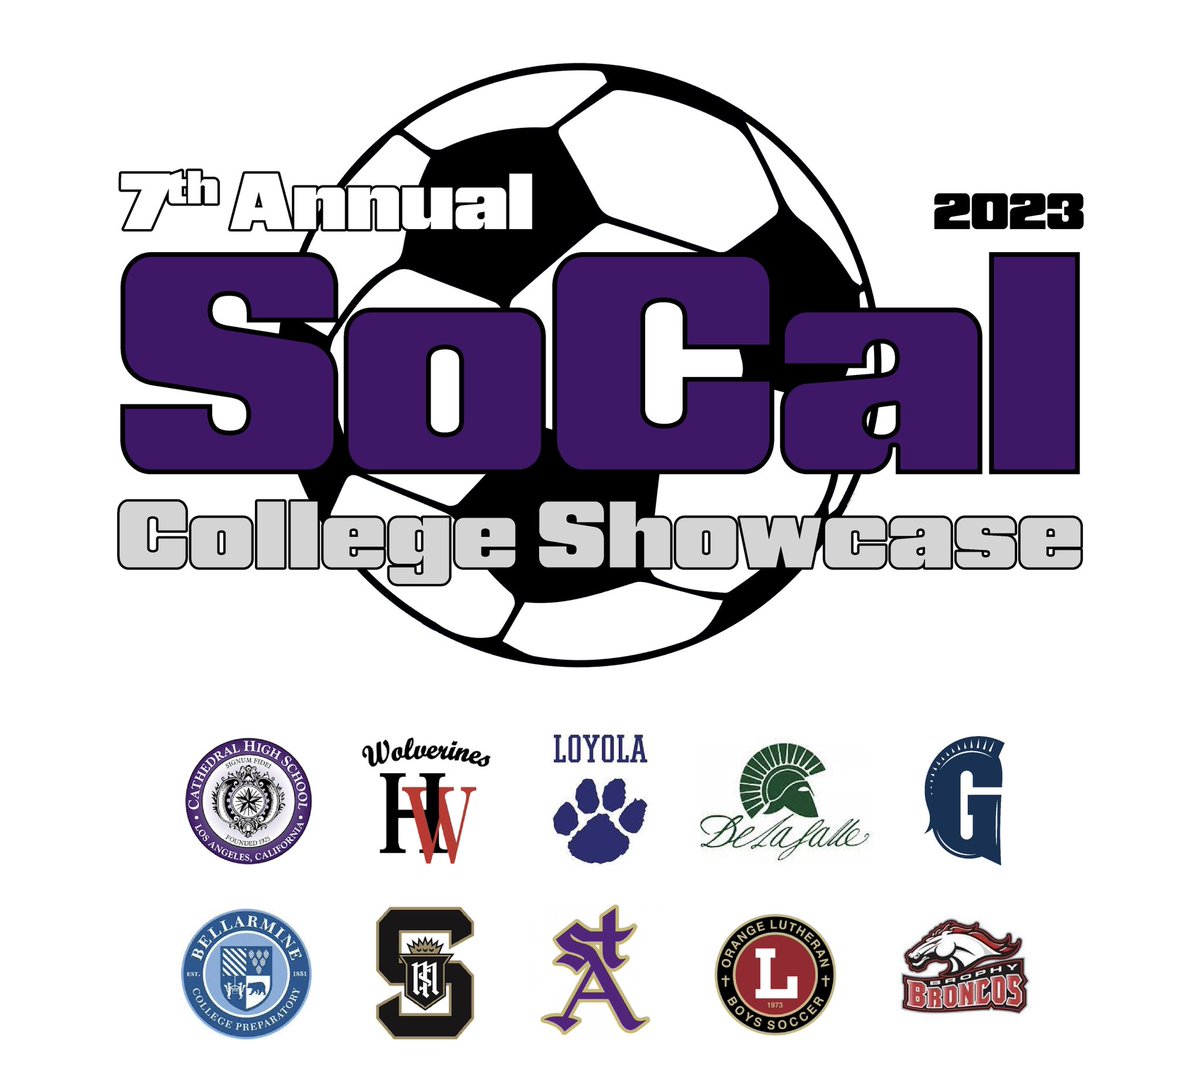 It’s a Wrap! Thank you to all of the student-athletes, coaches, volunteers, parents, college coaches and fans! See you in 2024! @BCPSports @ServiteSoccer @phantomsoccer @dlssoccer @GPrep_Athletics @hwathletics @LoyolaSoccer @stavarsoccer @BrophyAthletics @OLuBoysSoccer